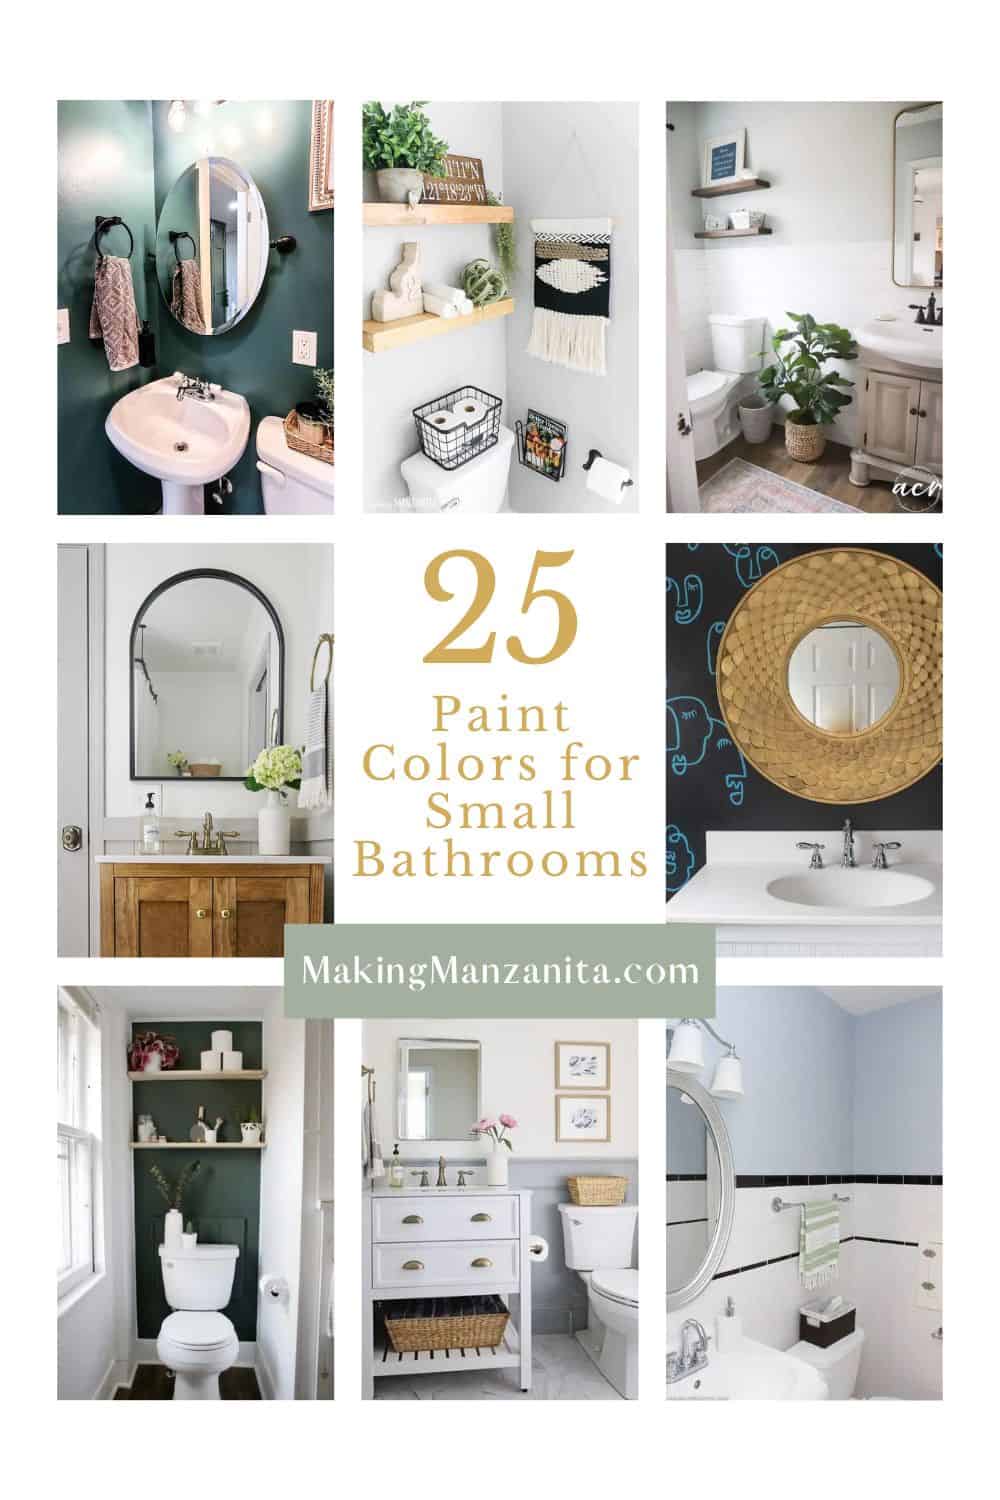 Let's take a look at these 25 best paint colors for small bathrooms! From white to gray and green to black with a few in between, you're sure to find a color you will love for your bathroom.